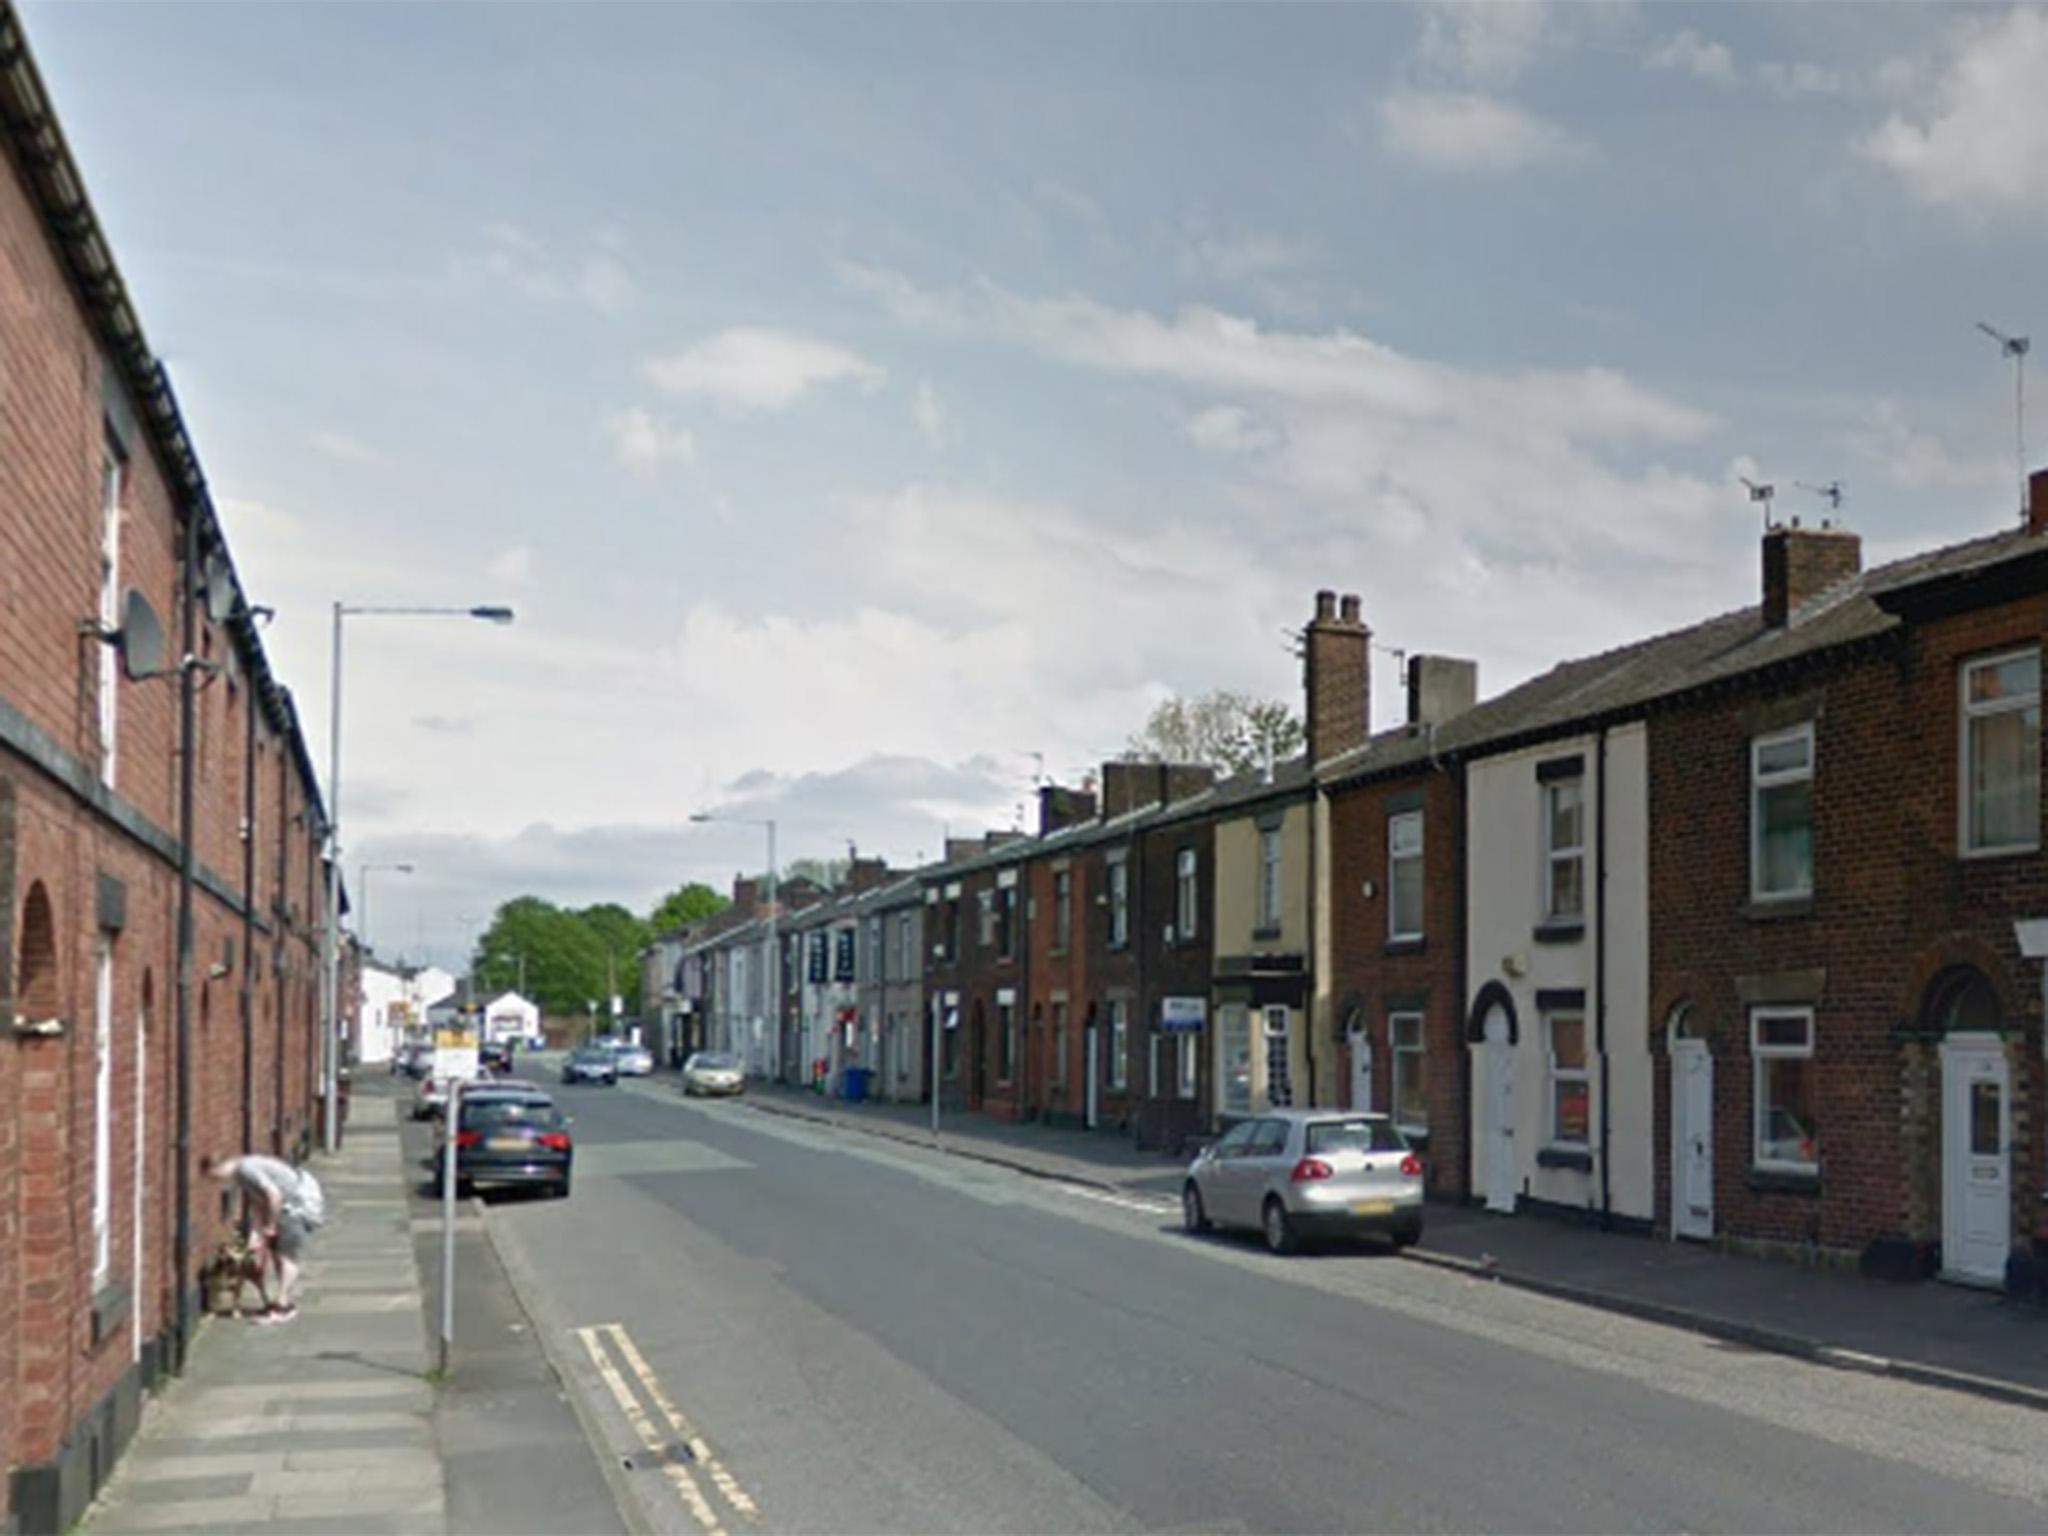 The incident occured on Cross Lane in Radcliffe, Greater Manchester